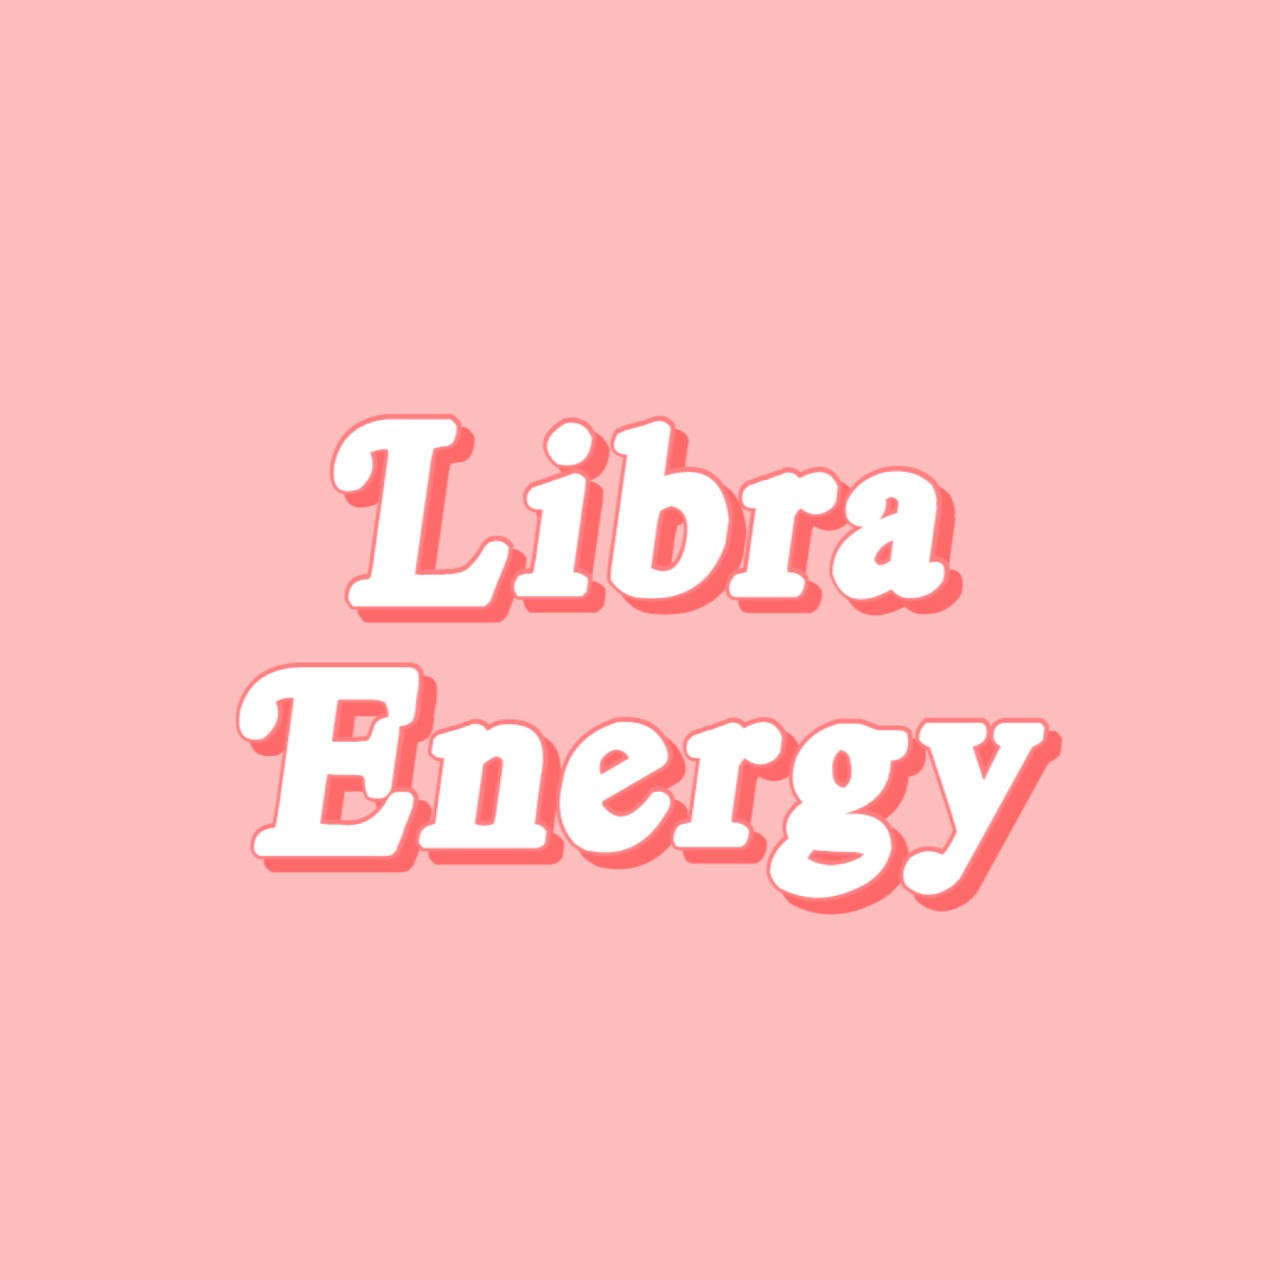 Libra Energy Pink Picture